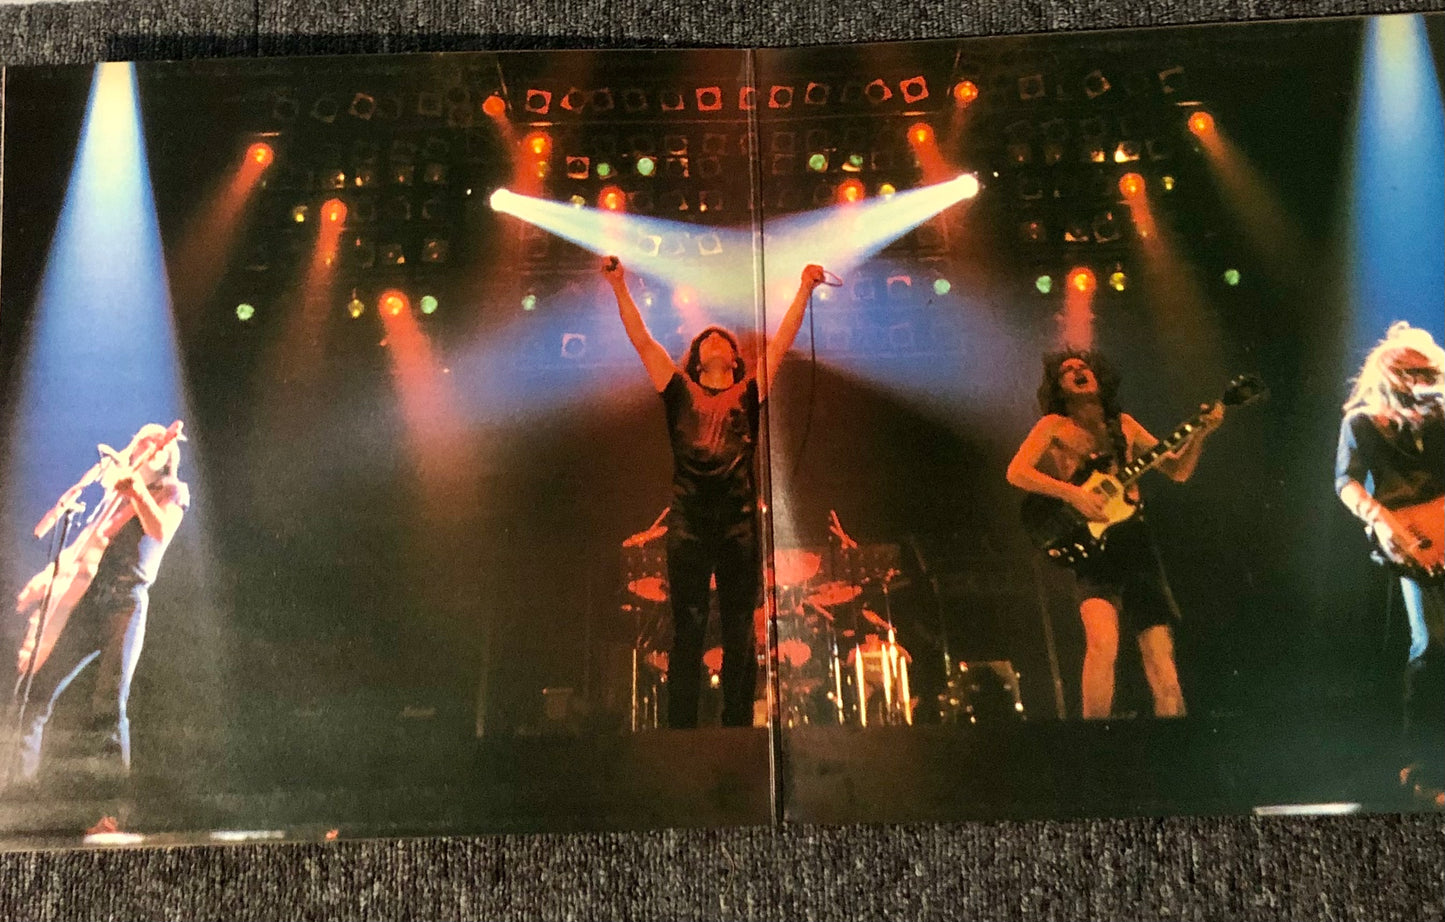 AC/DC  FOR THOSE ABOUT TO ROCK - AUSTRALIA - 1st PRESS - RED ALBERT - NEAR MINT